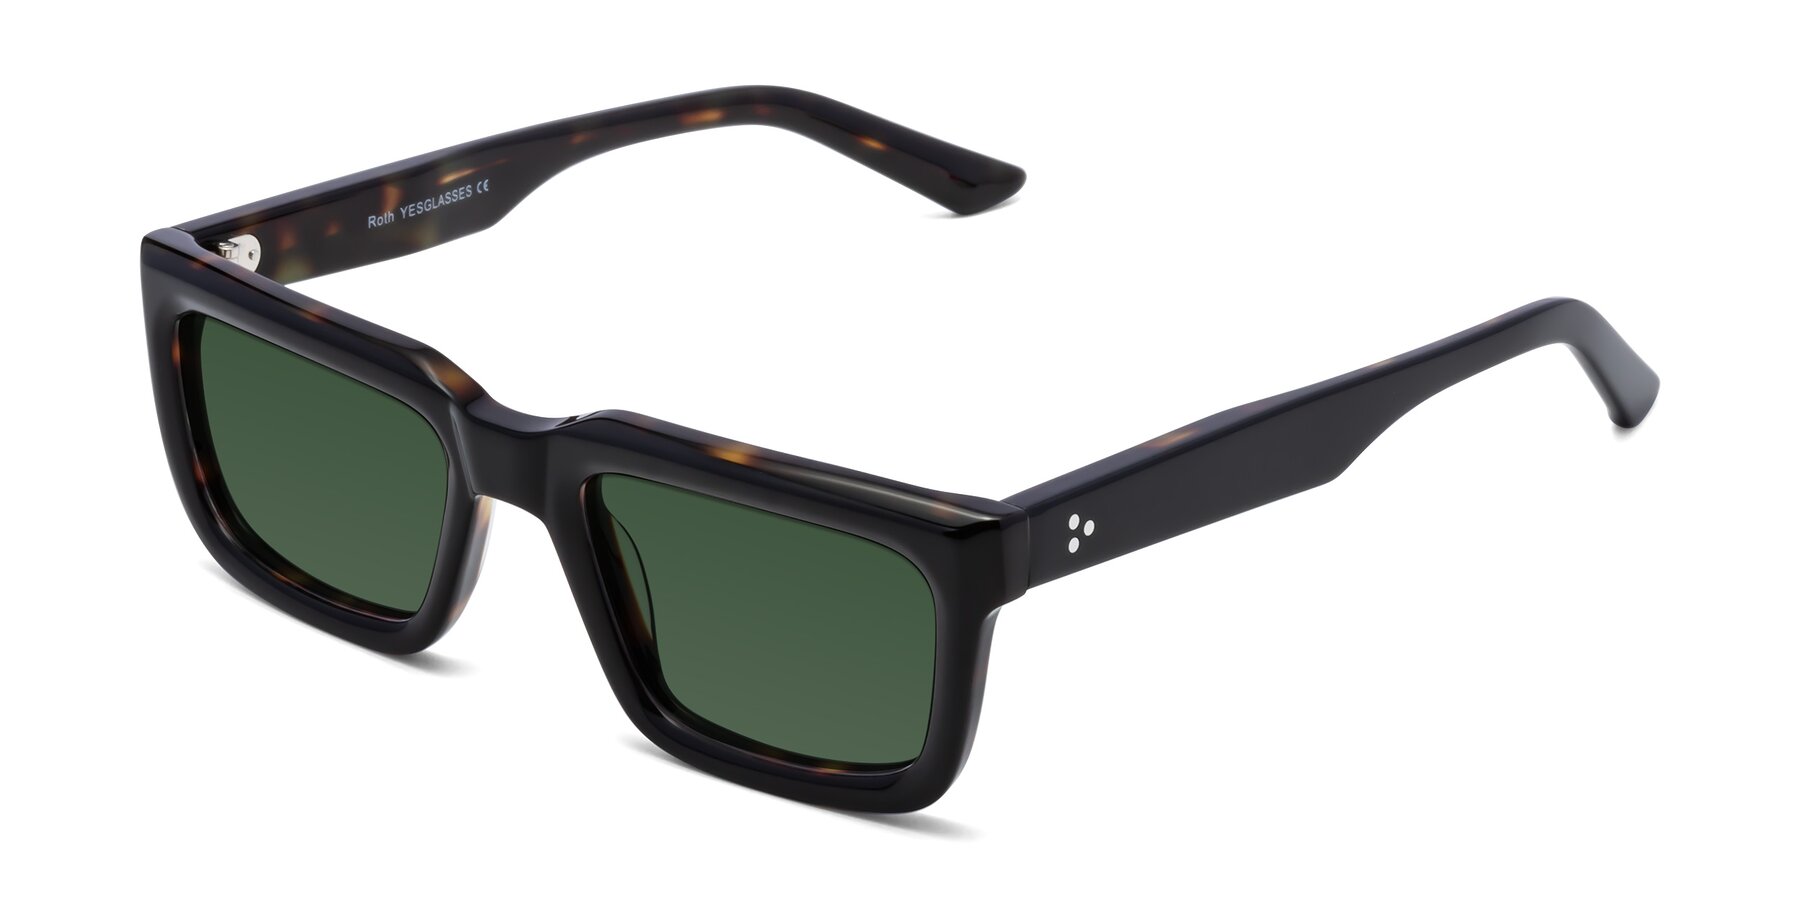 Angle of Roth in Black-Tortoise with Green Tinted Lenses